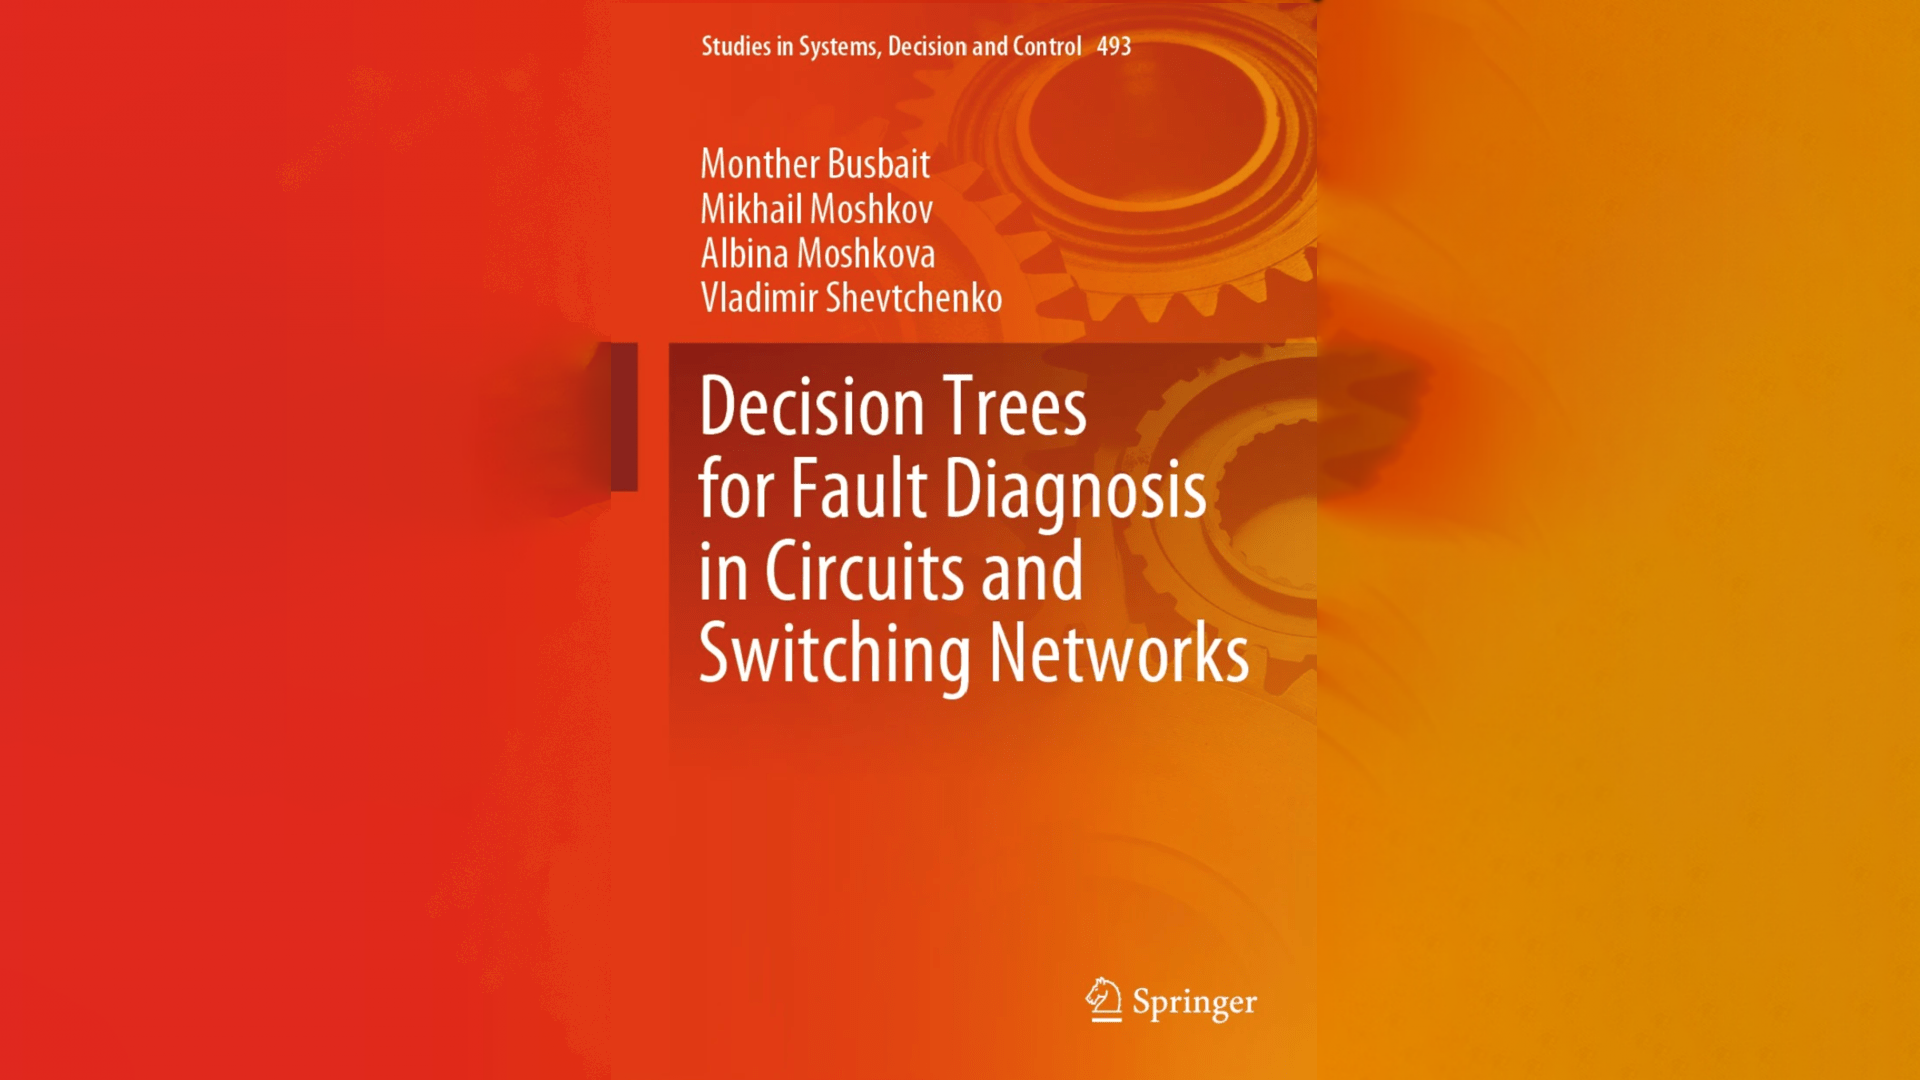 New book Decision Trees for Fault Diagnosis in Circuits and Switching Networks by Monther Busbait, Mikhail Moshkov, Albina Moshkova, and Vladimir Shevtchenko is published online.